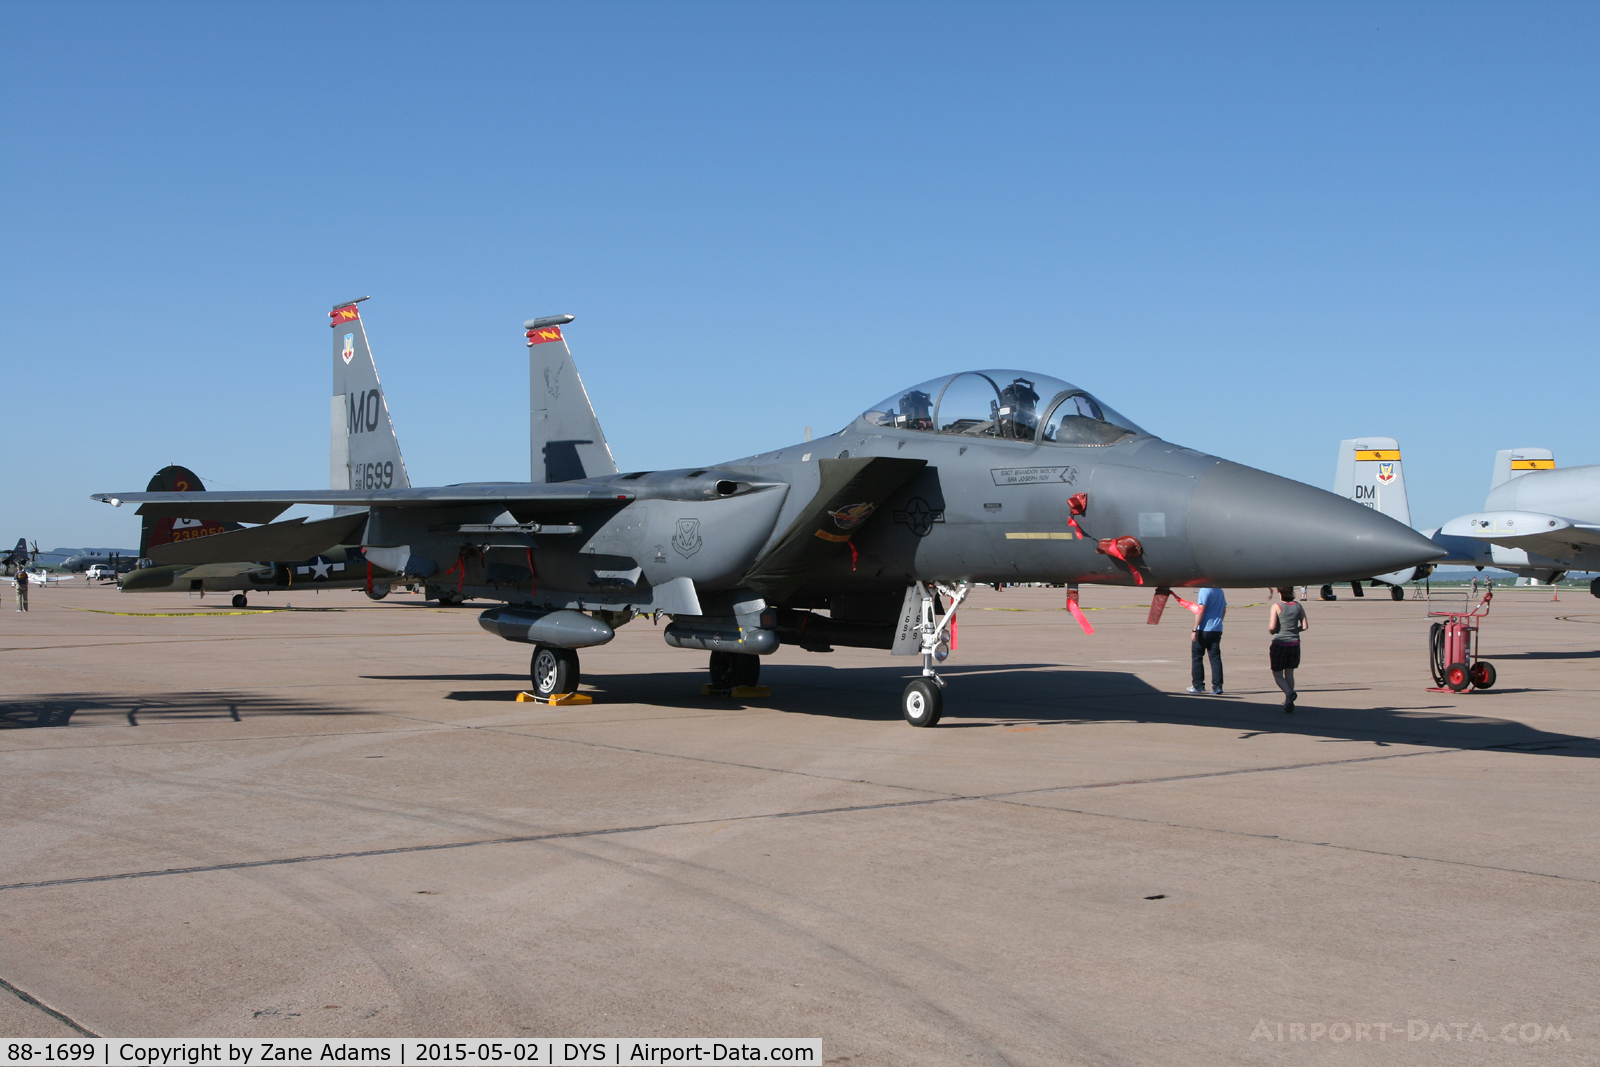 88-1699, 1988 McDonnell Douglas F-15E Strike Eagle C/N 1108/E083, At the 2014 Big Country Airshow - Dyess AFB, TX